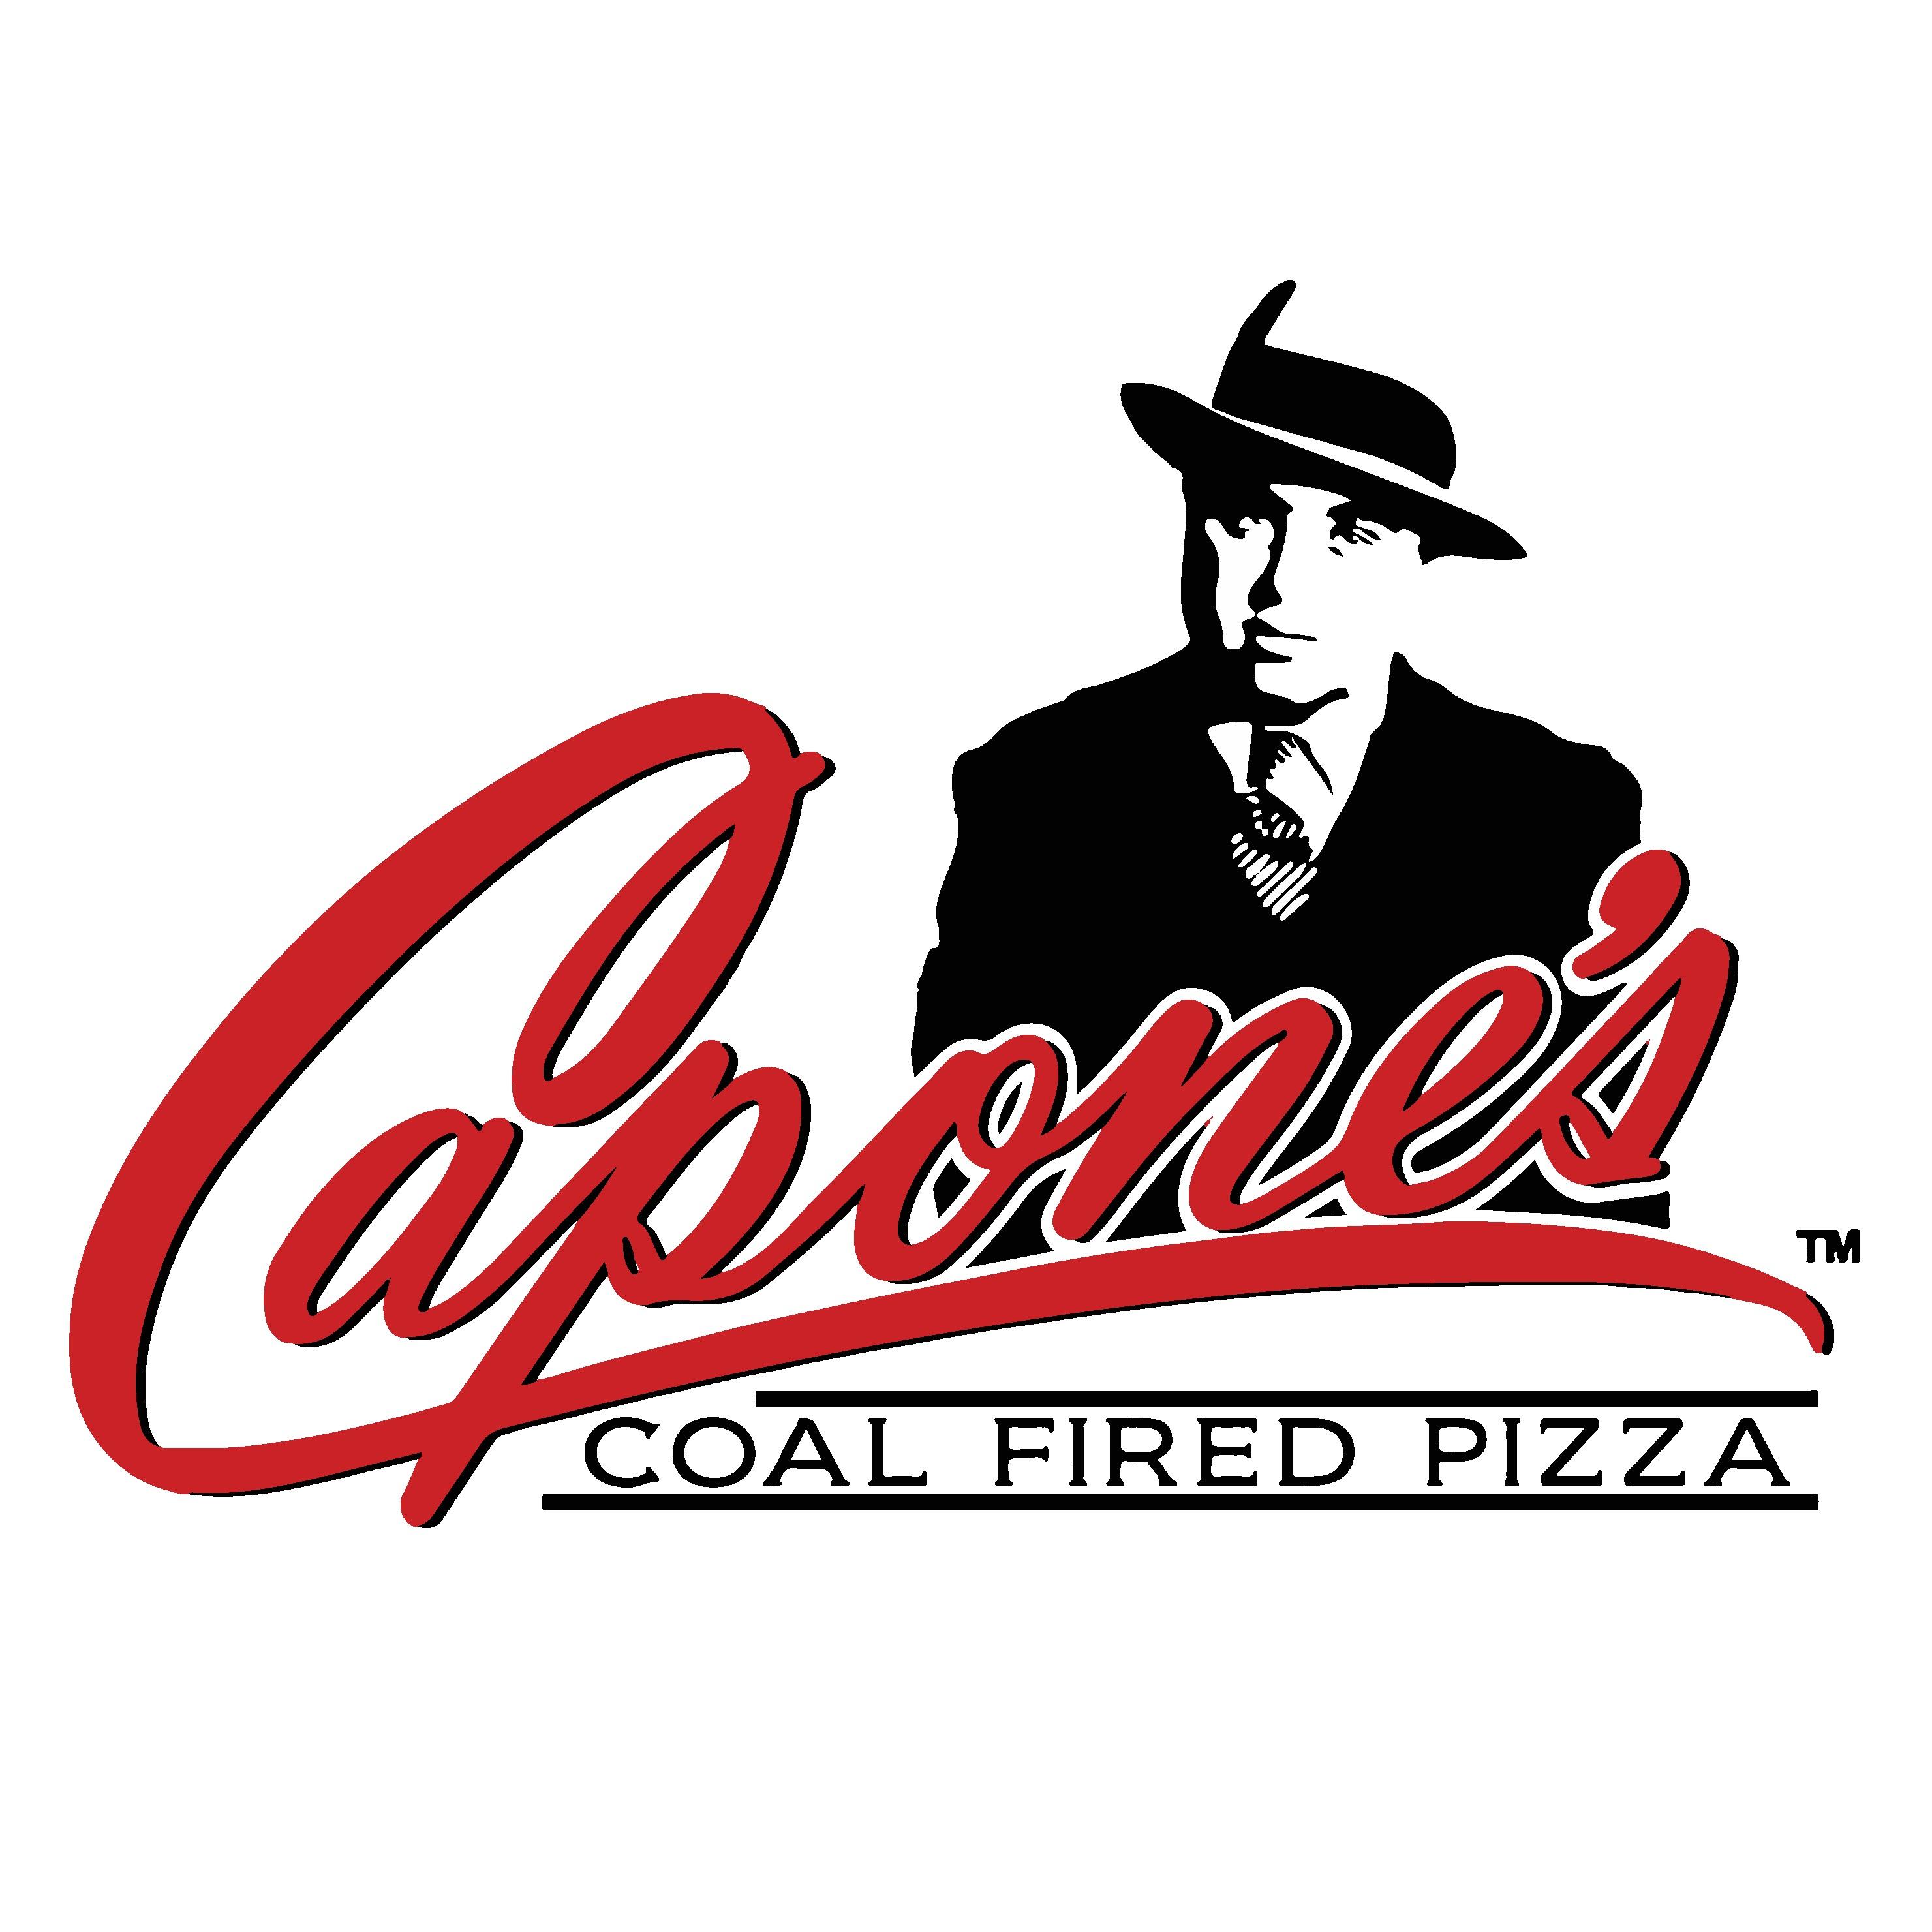 Capone's Coal Fired Pizza Photo